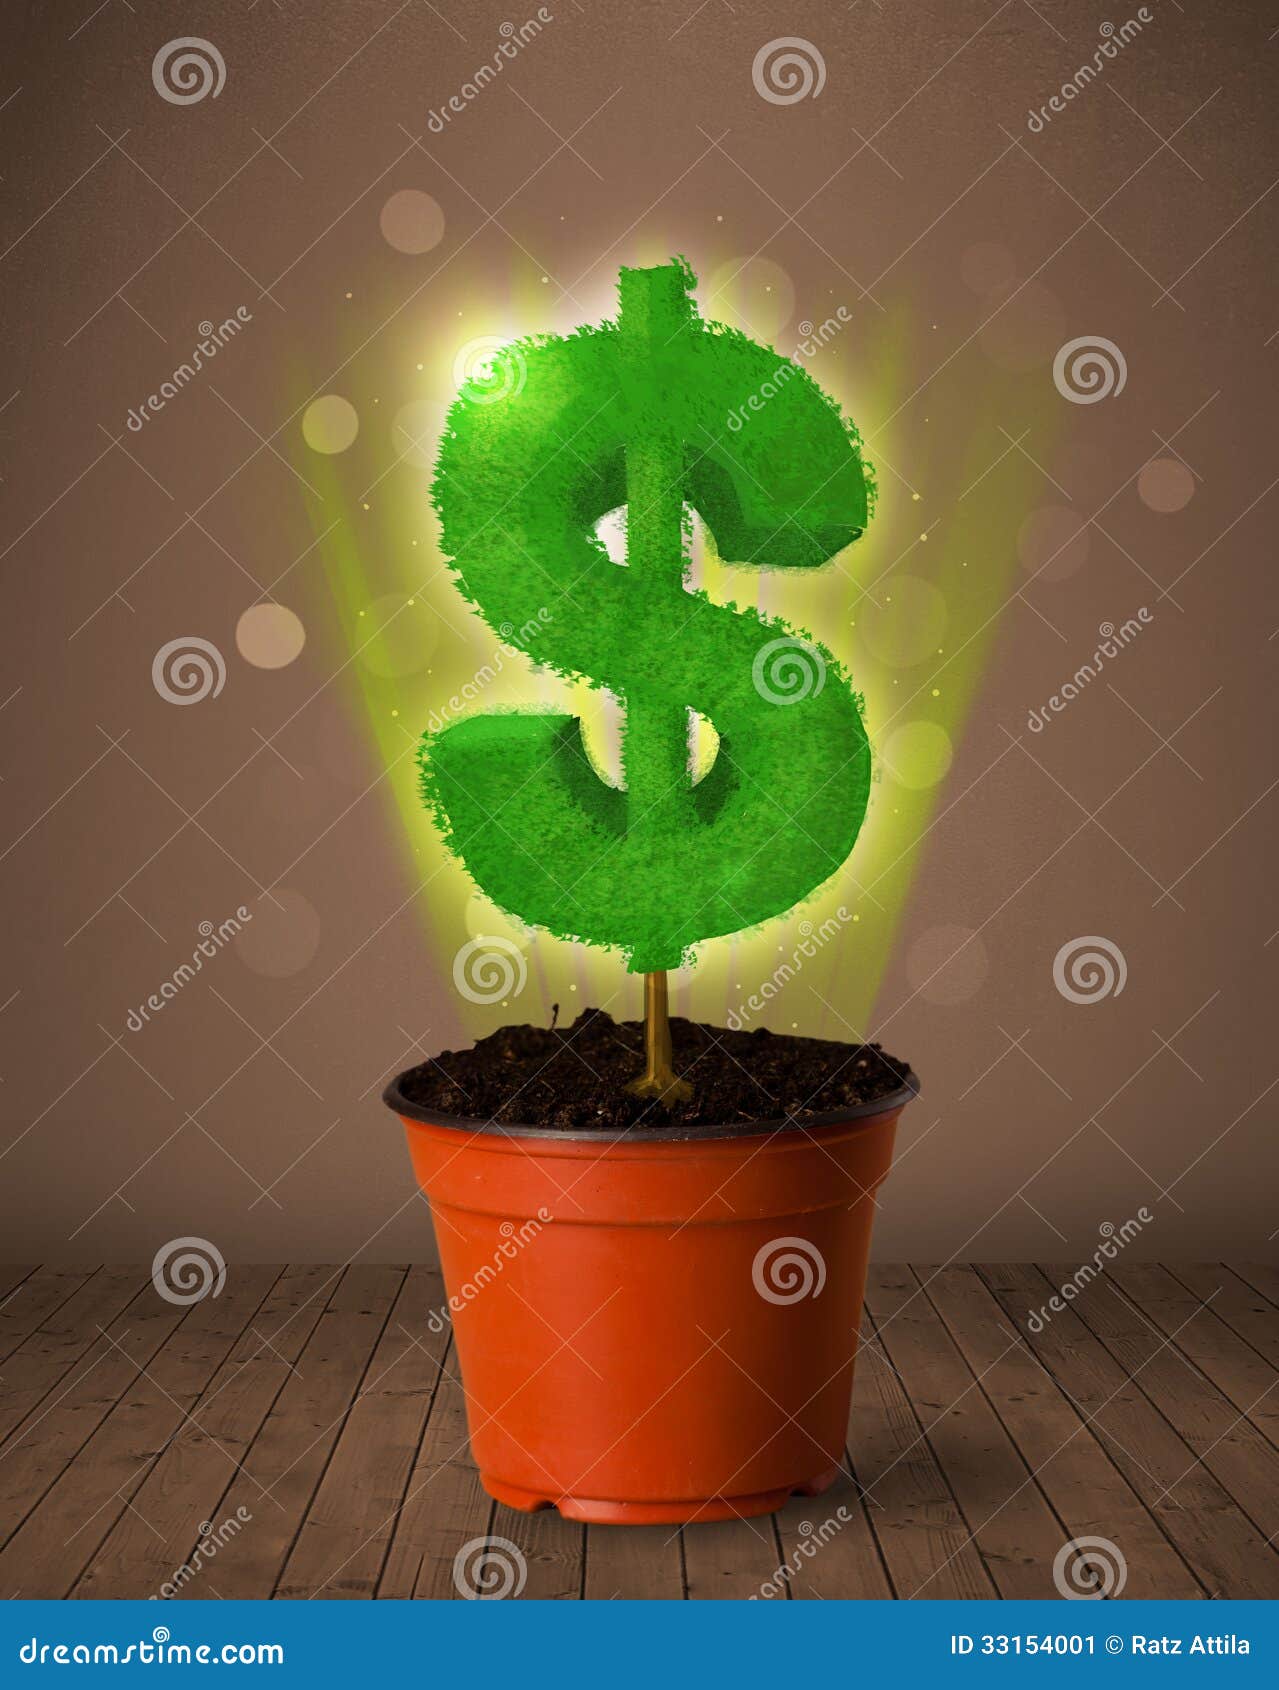 Dollar Sign Tree Coming Out of Flowerpot Stock Image - Image of herb ...